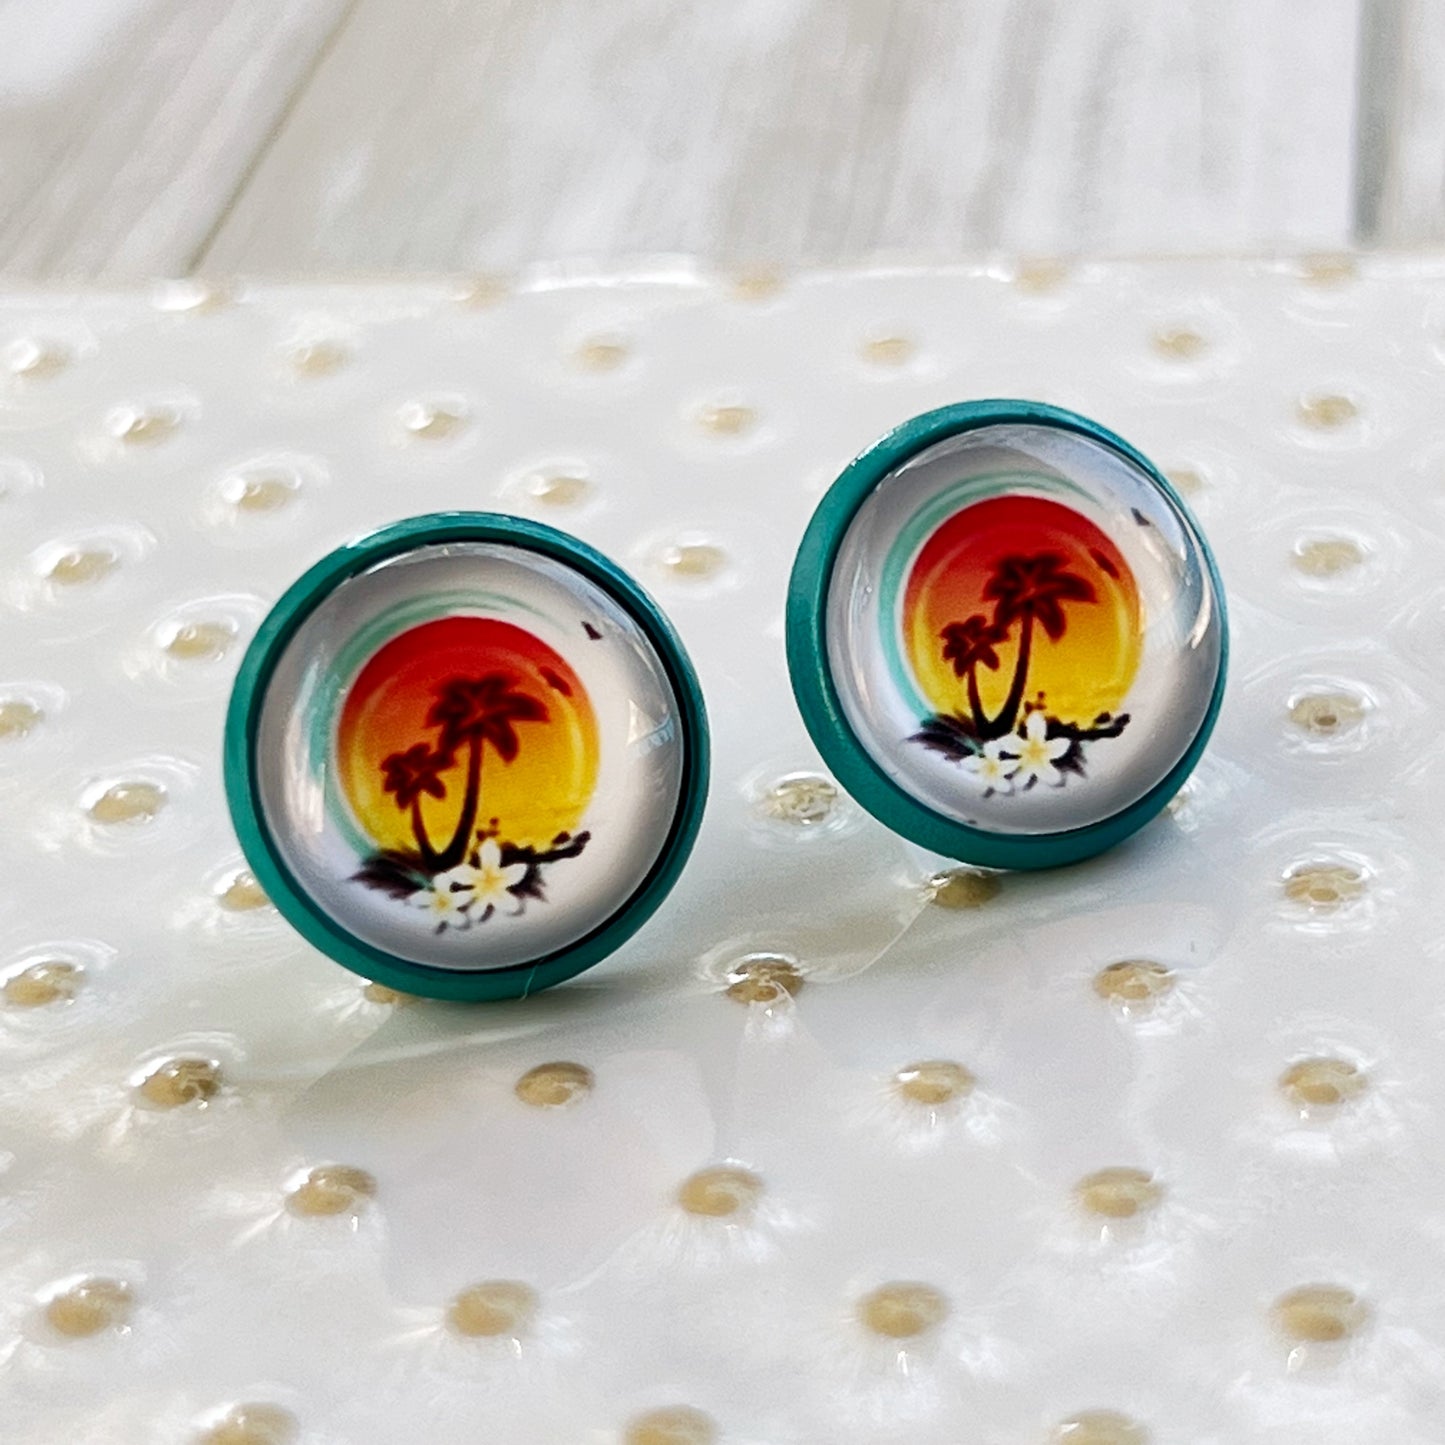 Sunset & Palm Tree Blue Stud Earrings - Tropical & Serene Accessories